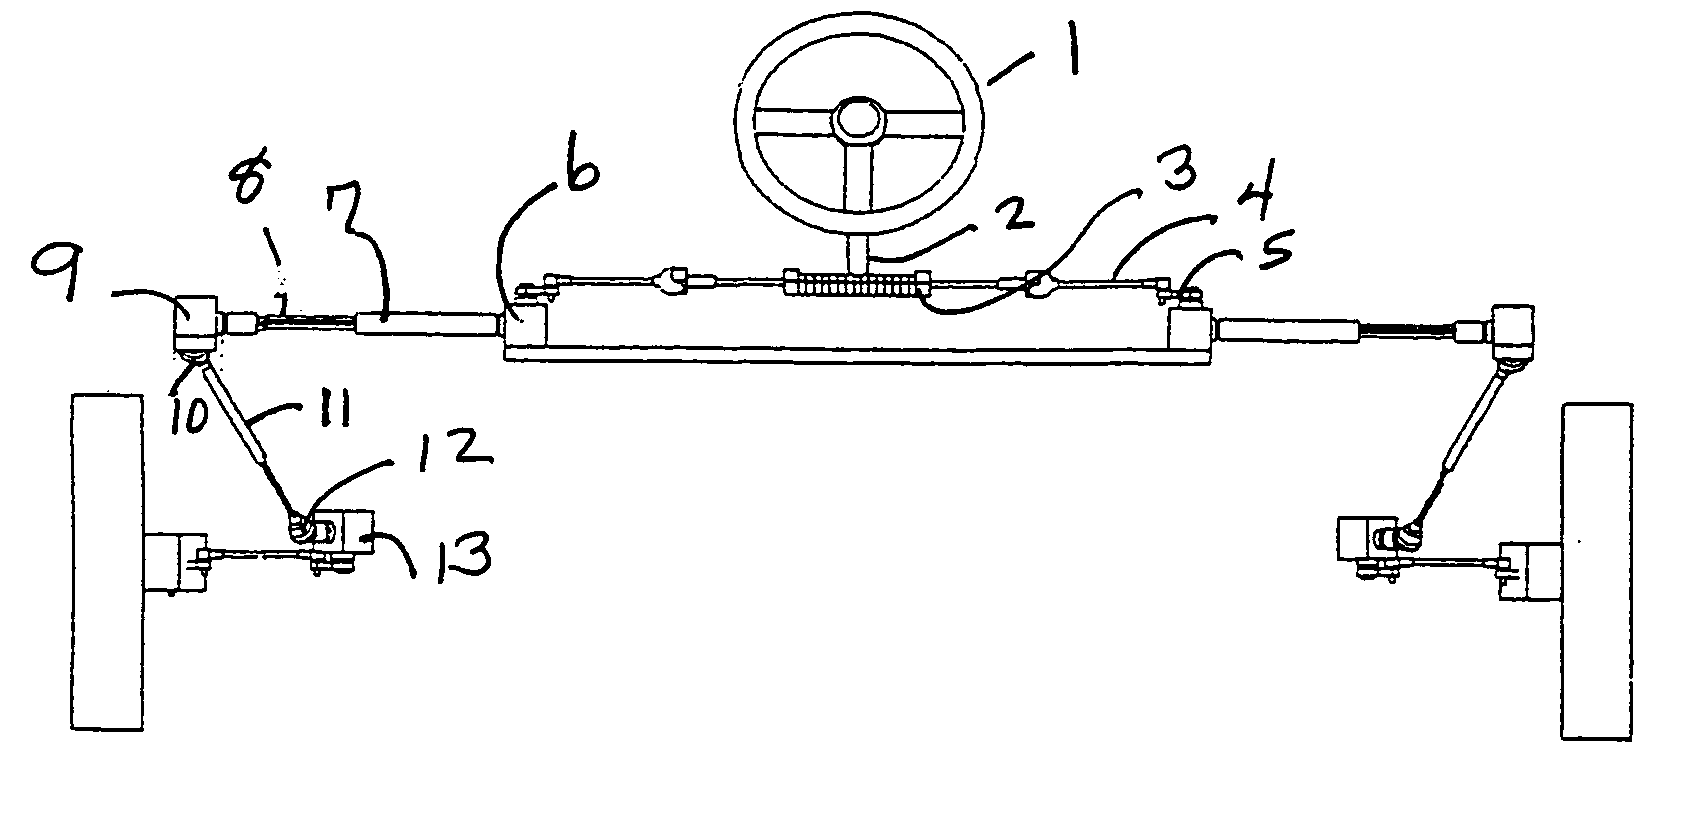 Expandable steering system